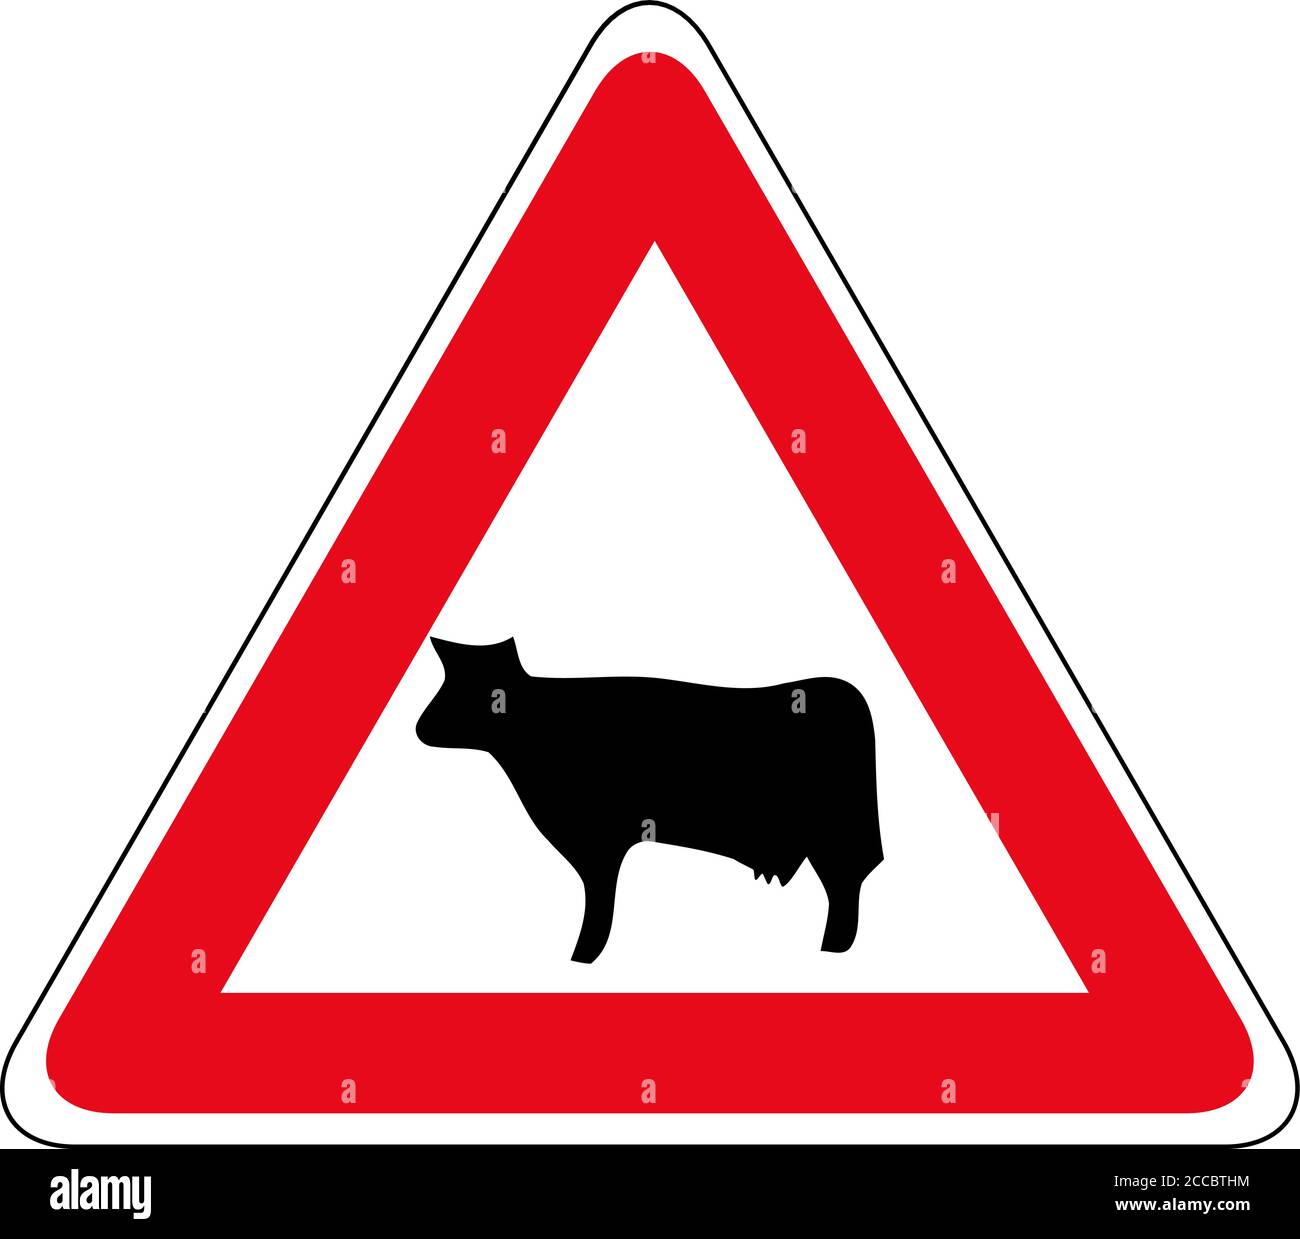 Cattle crossing warning road sign. Vector illustration of cow caution traffic sign. Farm hazzard attention red triangle mark. Stock Vector